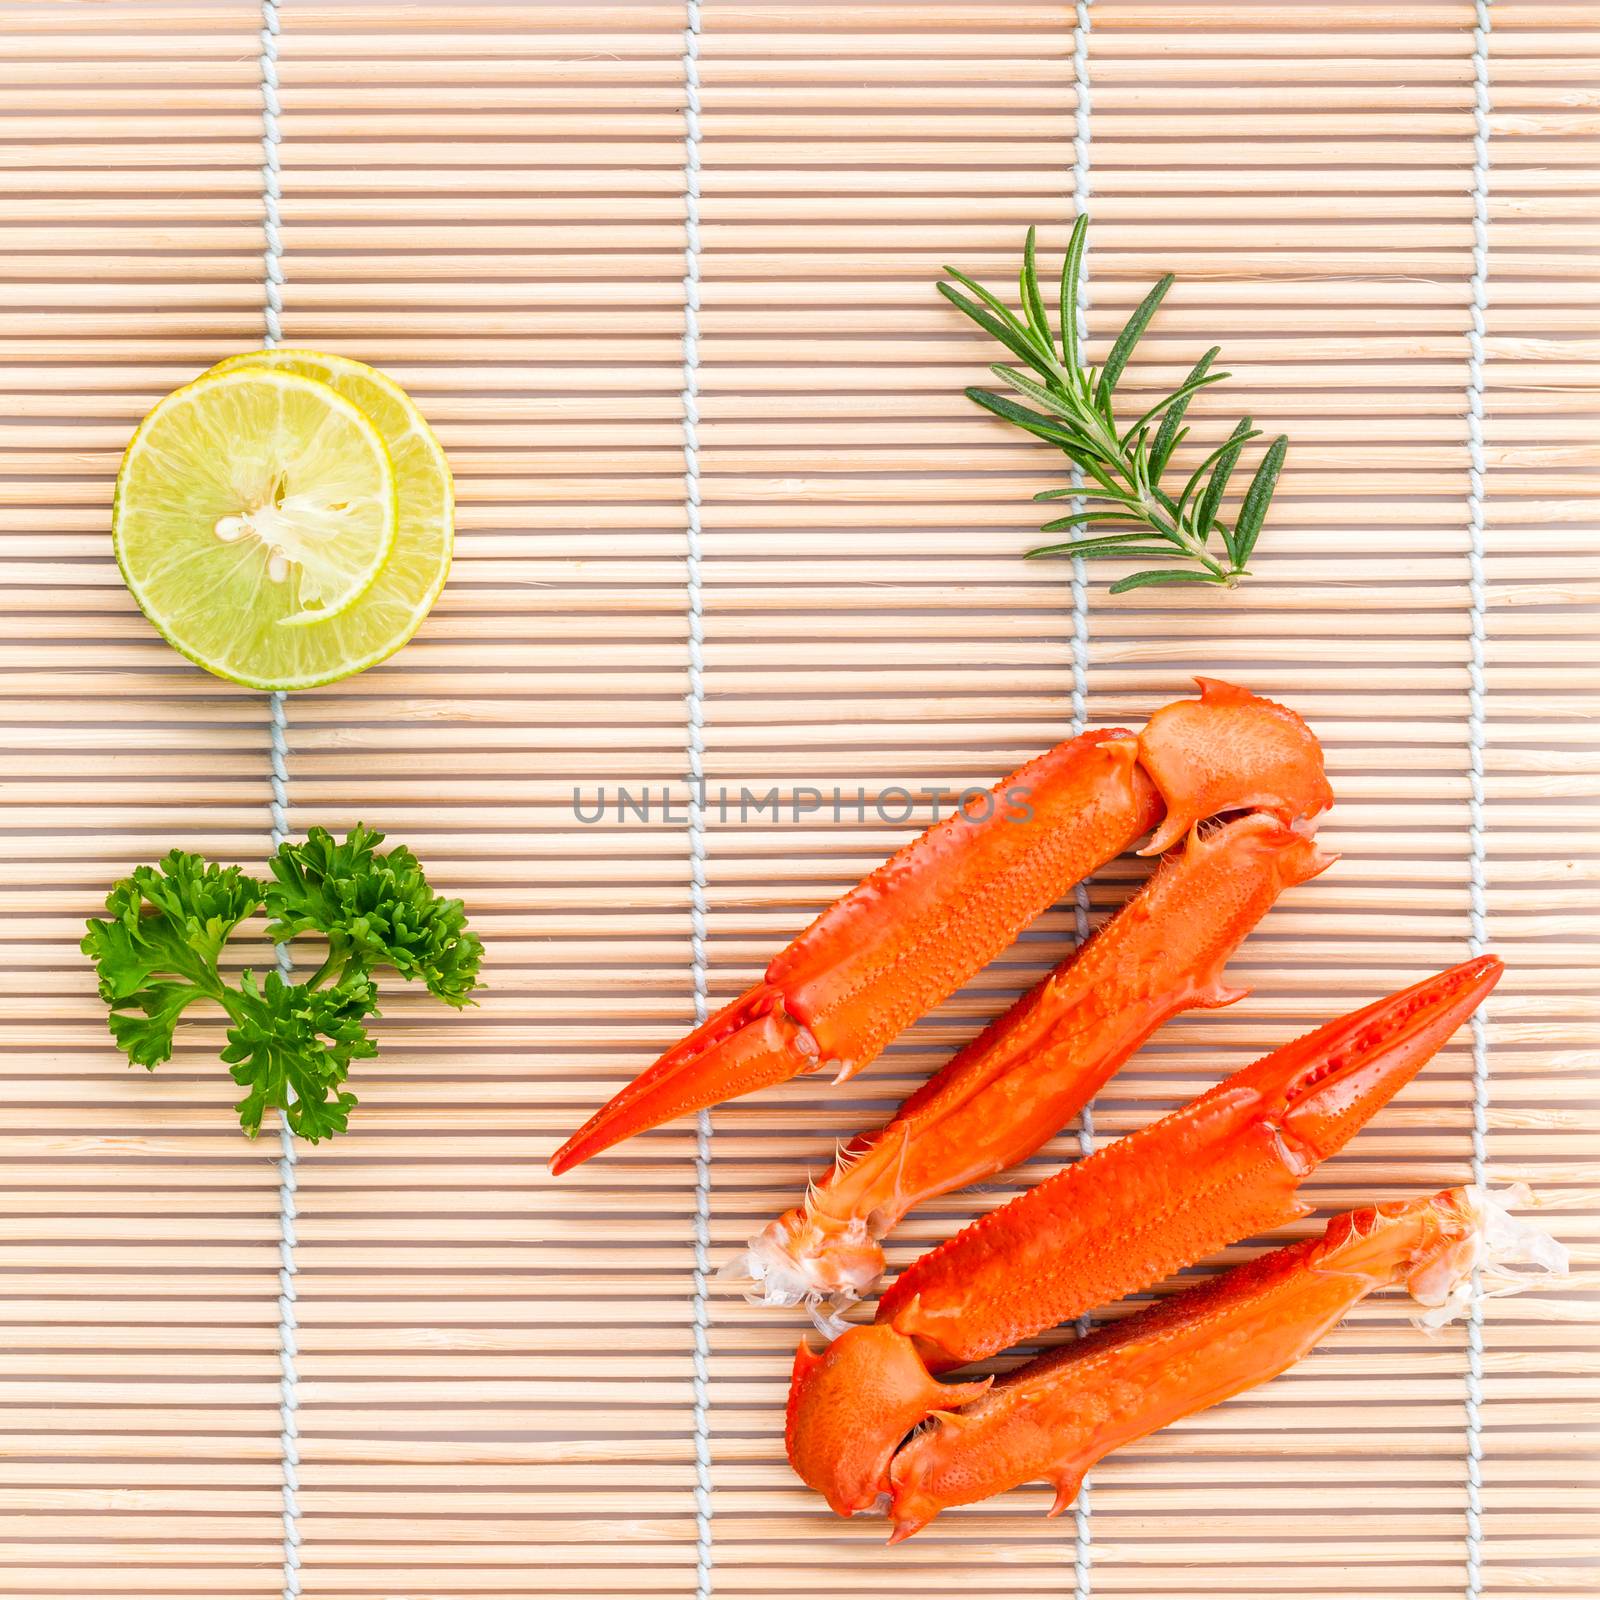 Boiled crab claws with lime and parsley on bamboo background.